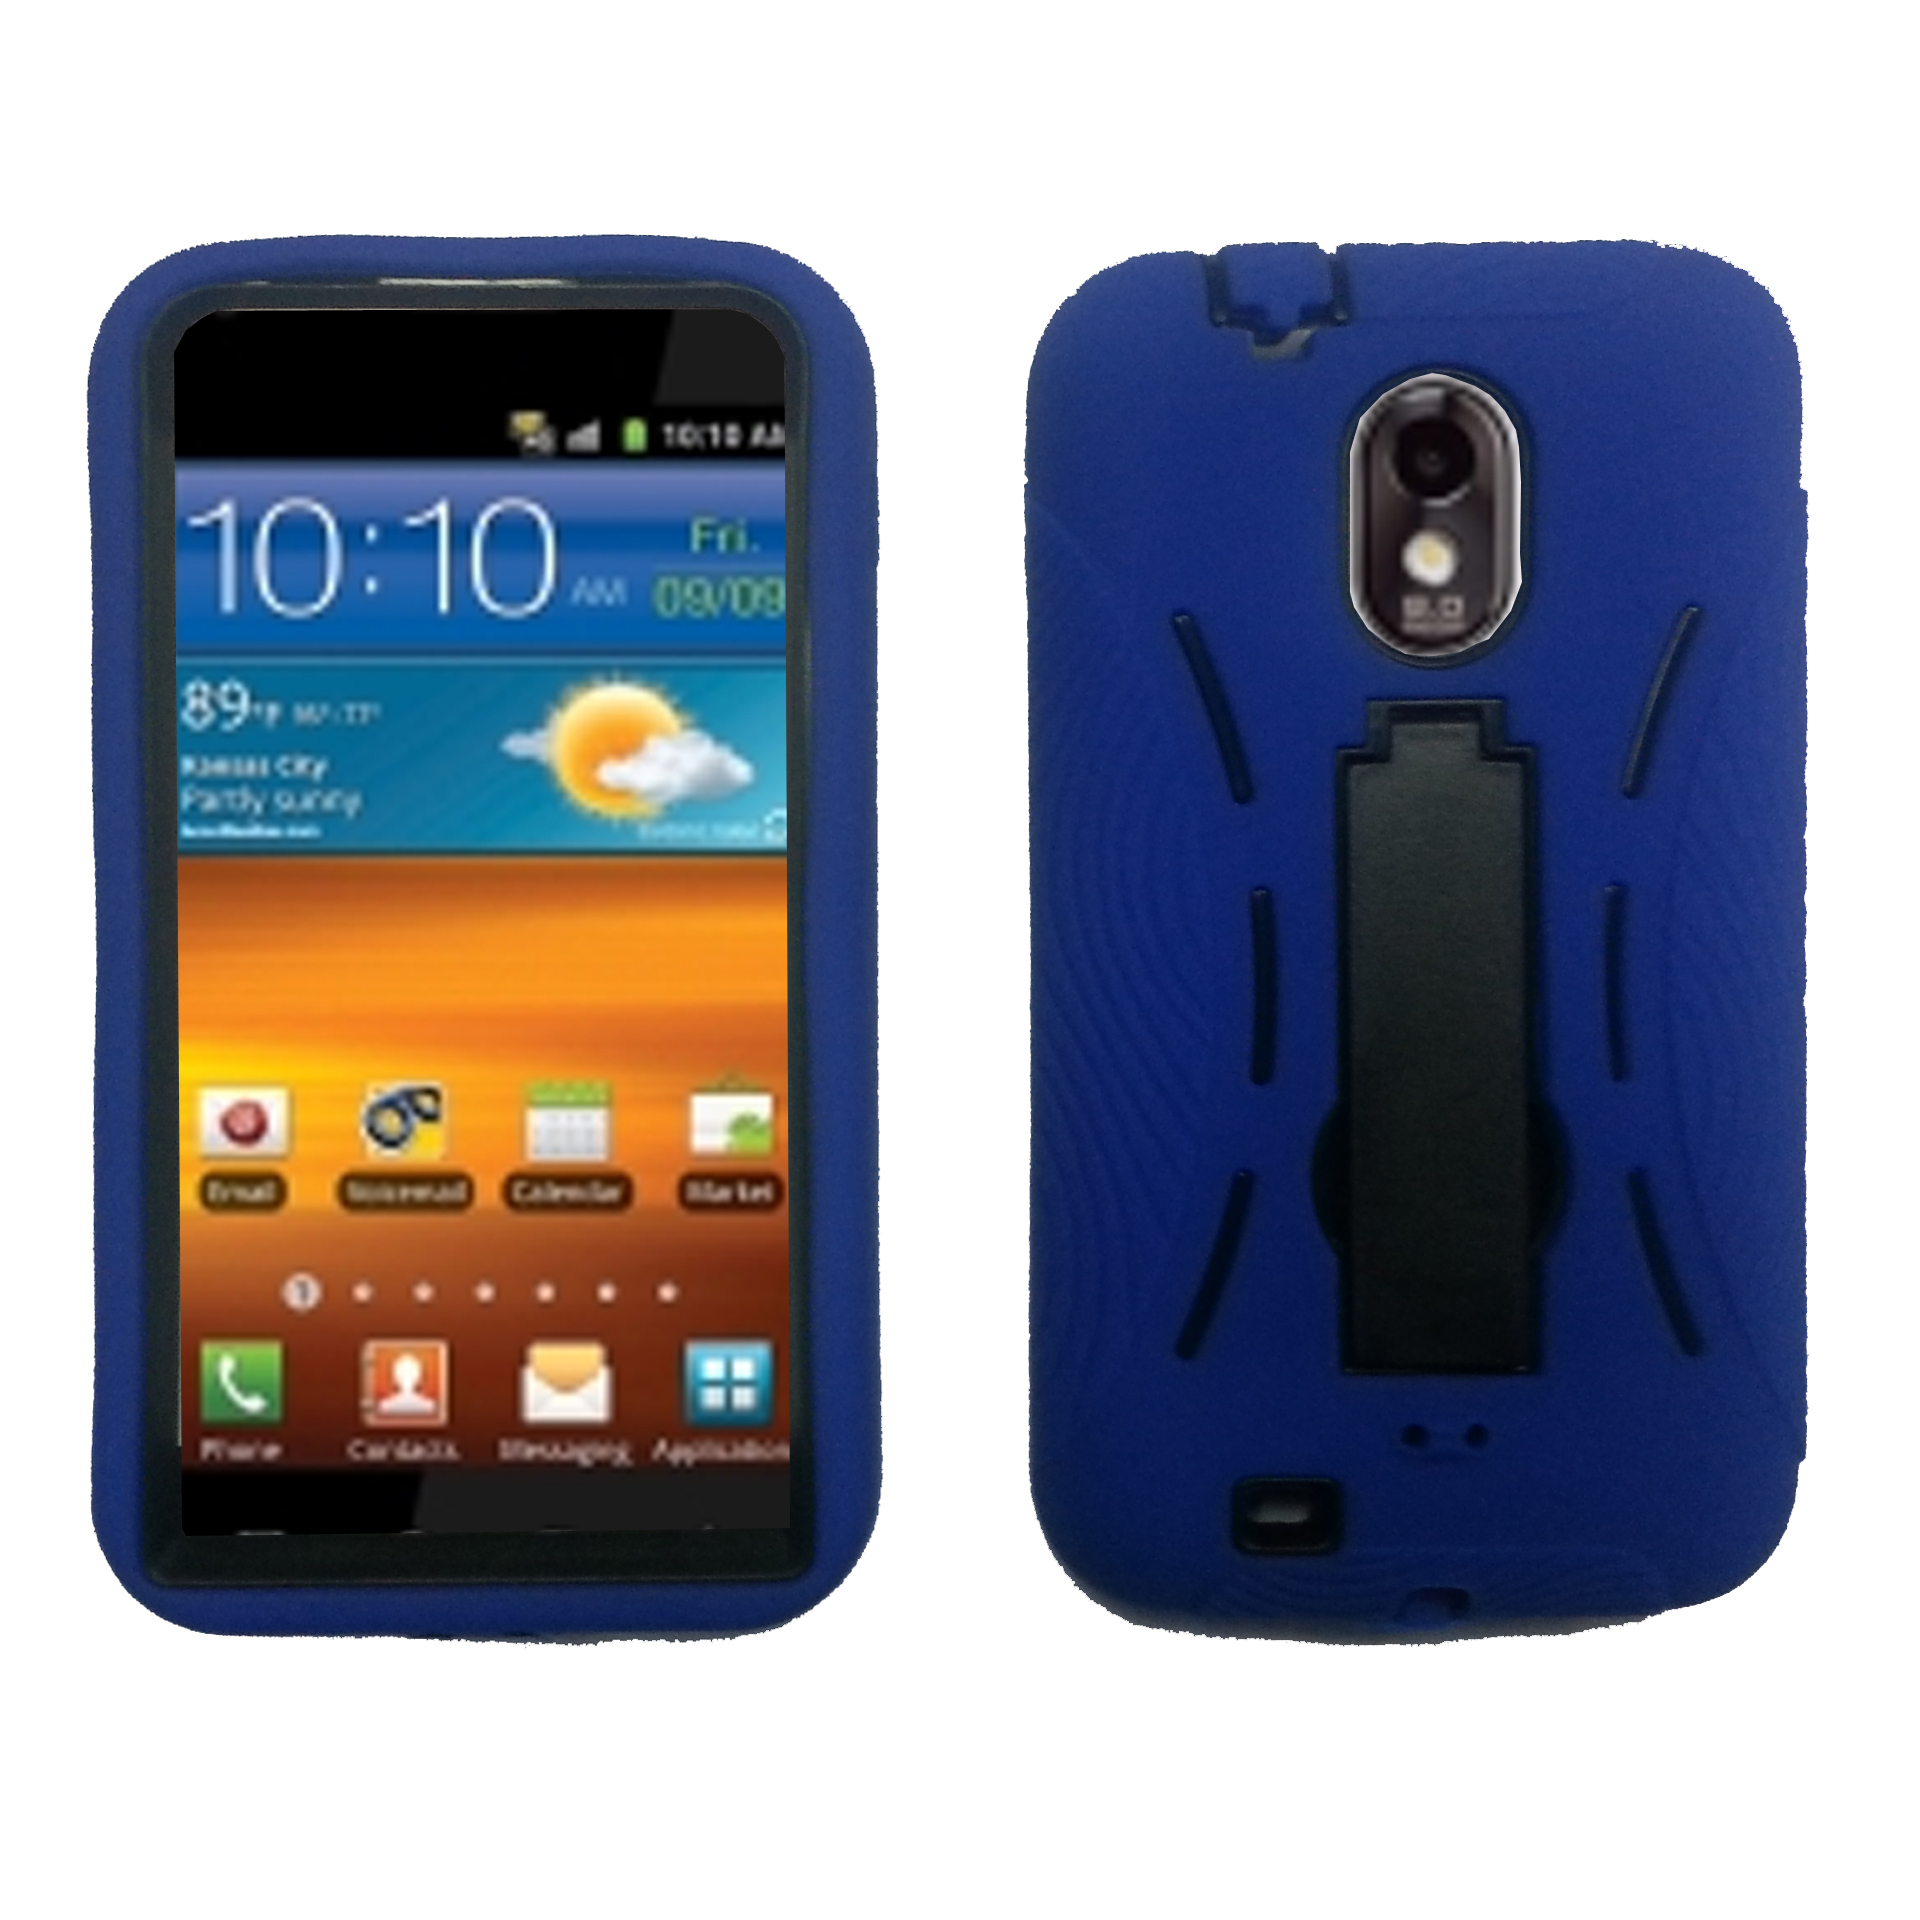 Robot defender case Silicone+PC Anti Impact Hybrid Case Kickstand shell For Samsung Galaxy SII D710 Blue